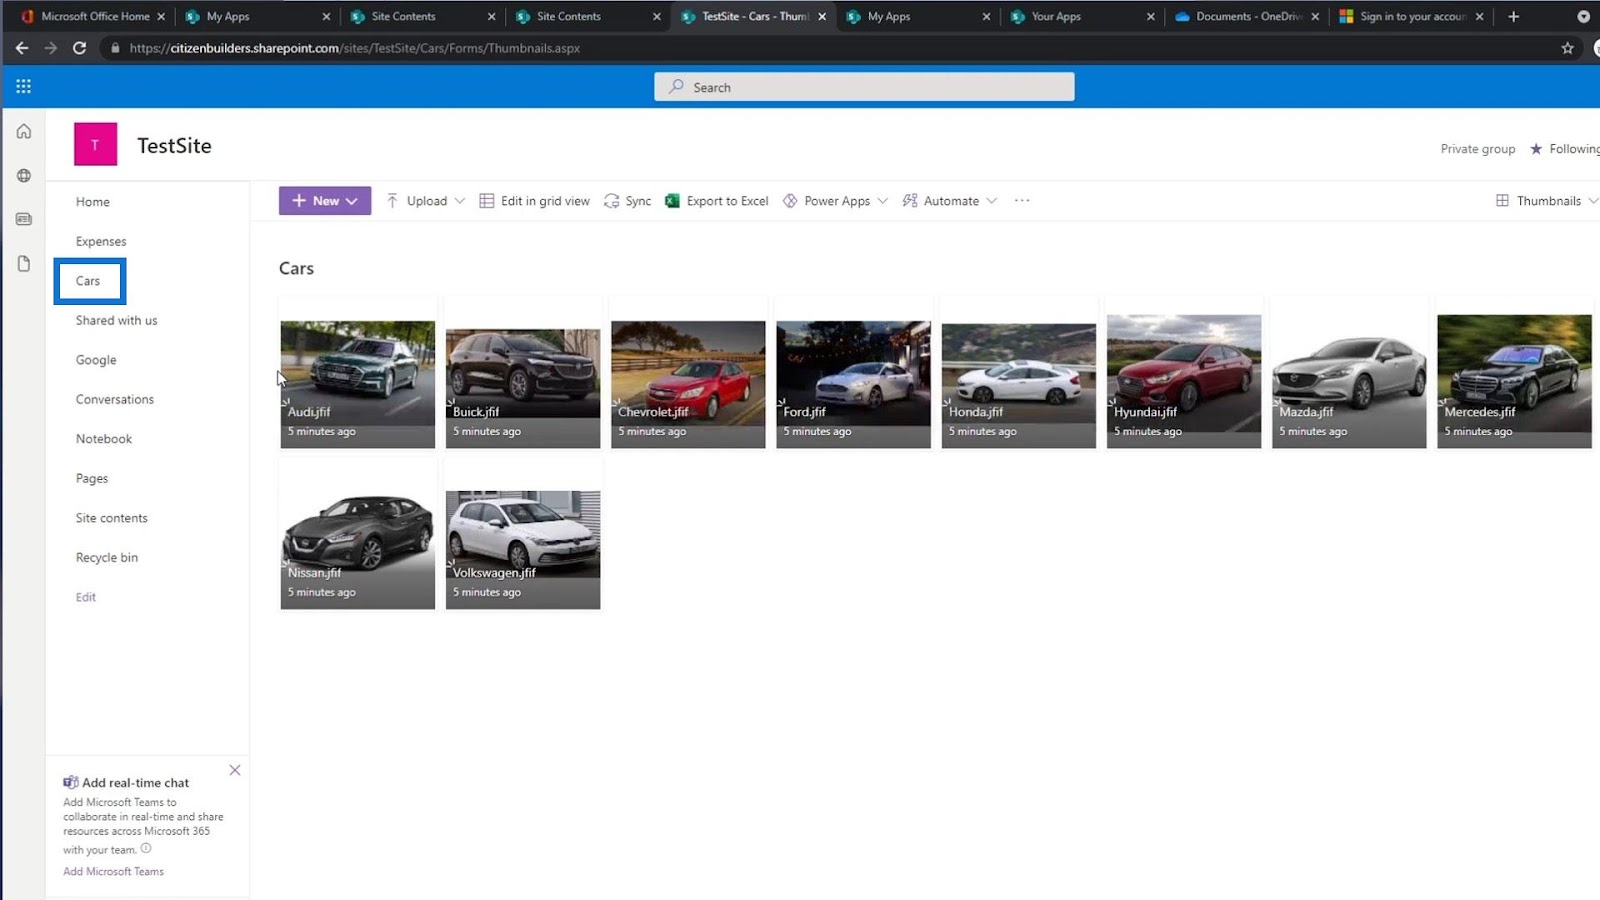 picture library in sharepoint